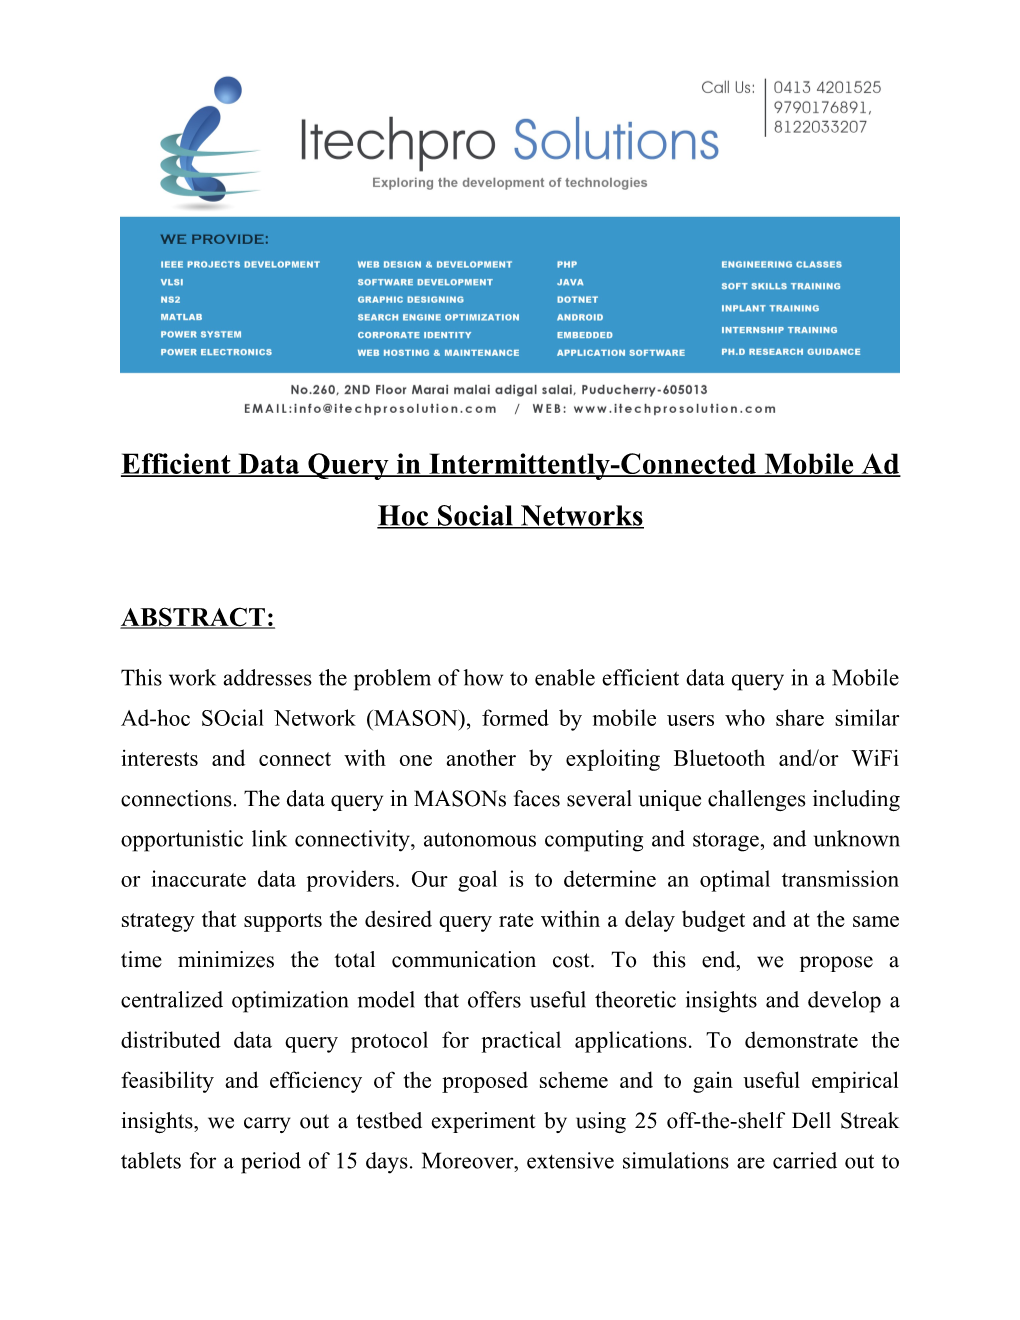 Efficient Data Query in Intermittently-Connected Mobile Ad Hoc Social Networks